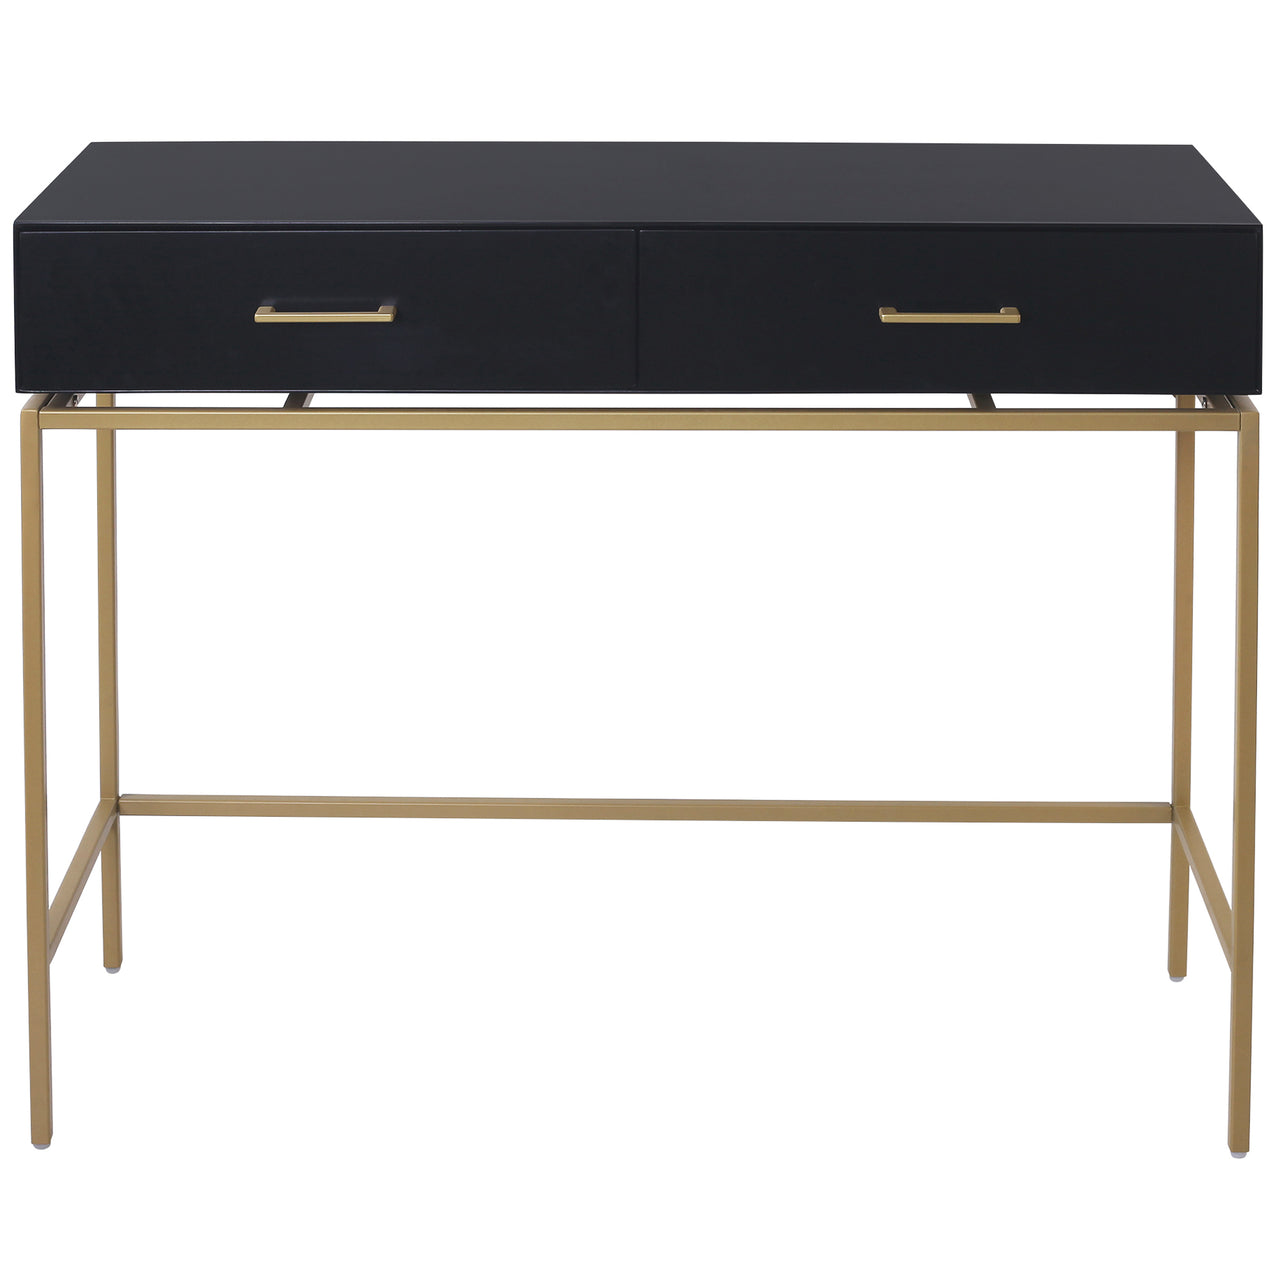 Black Kylie Console Table